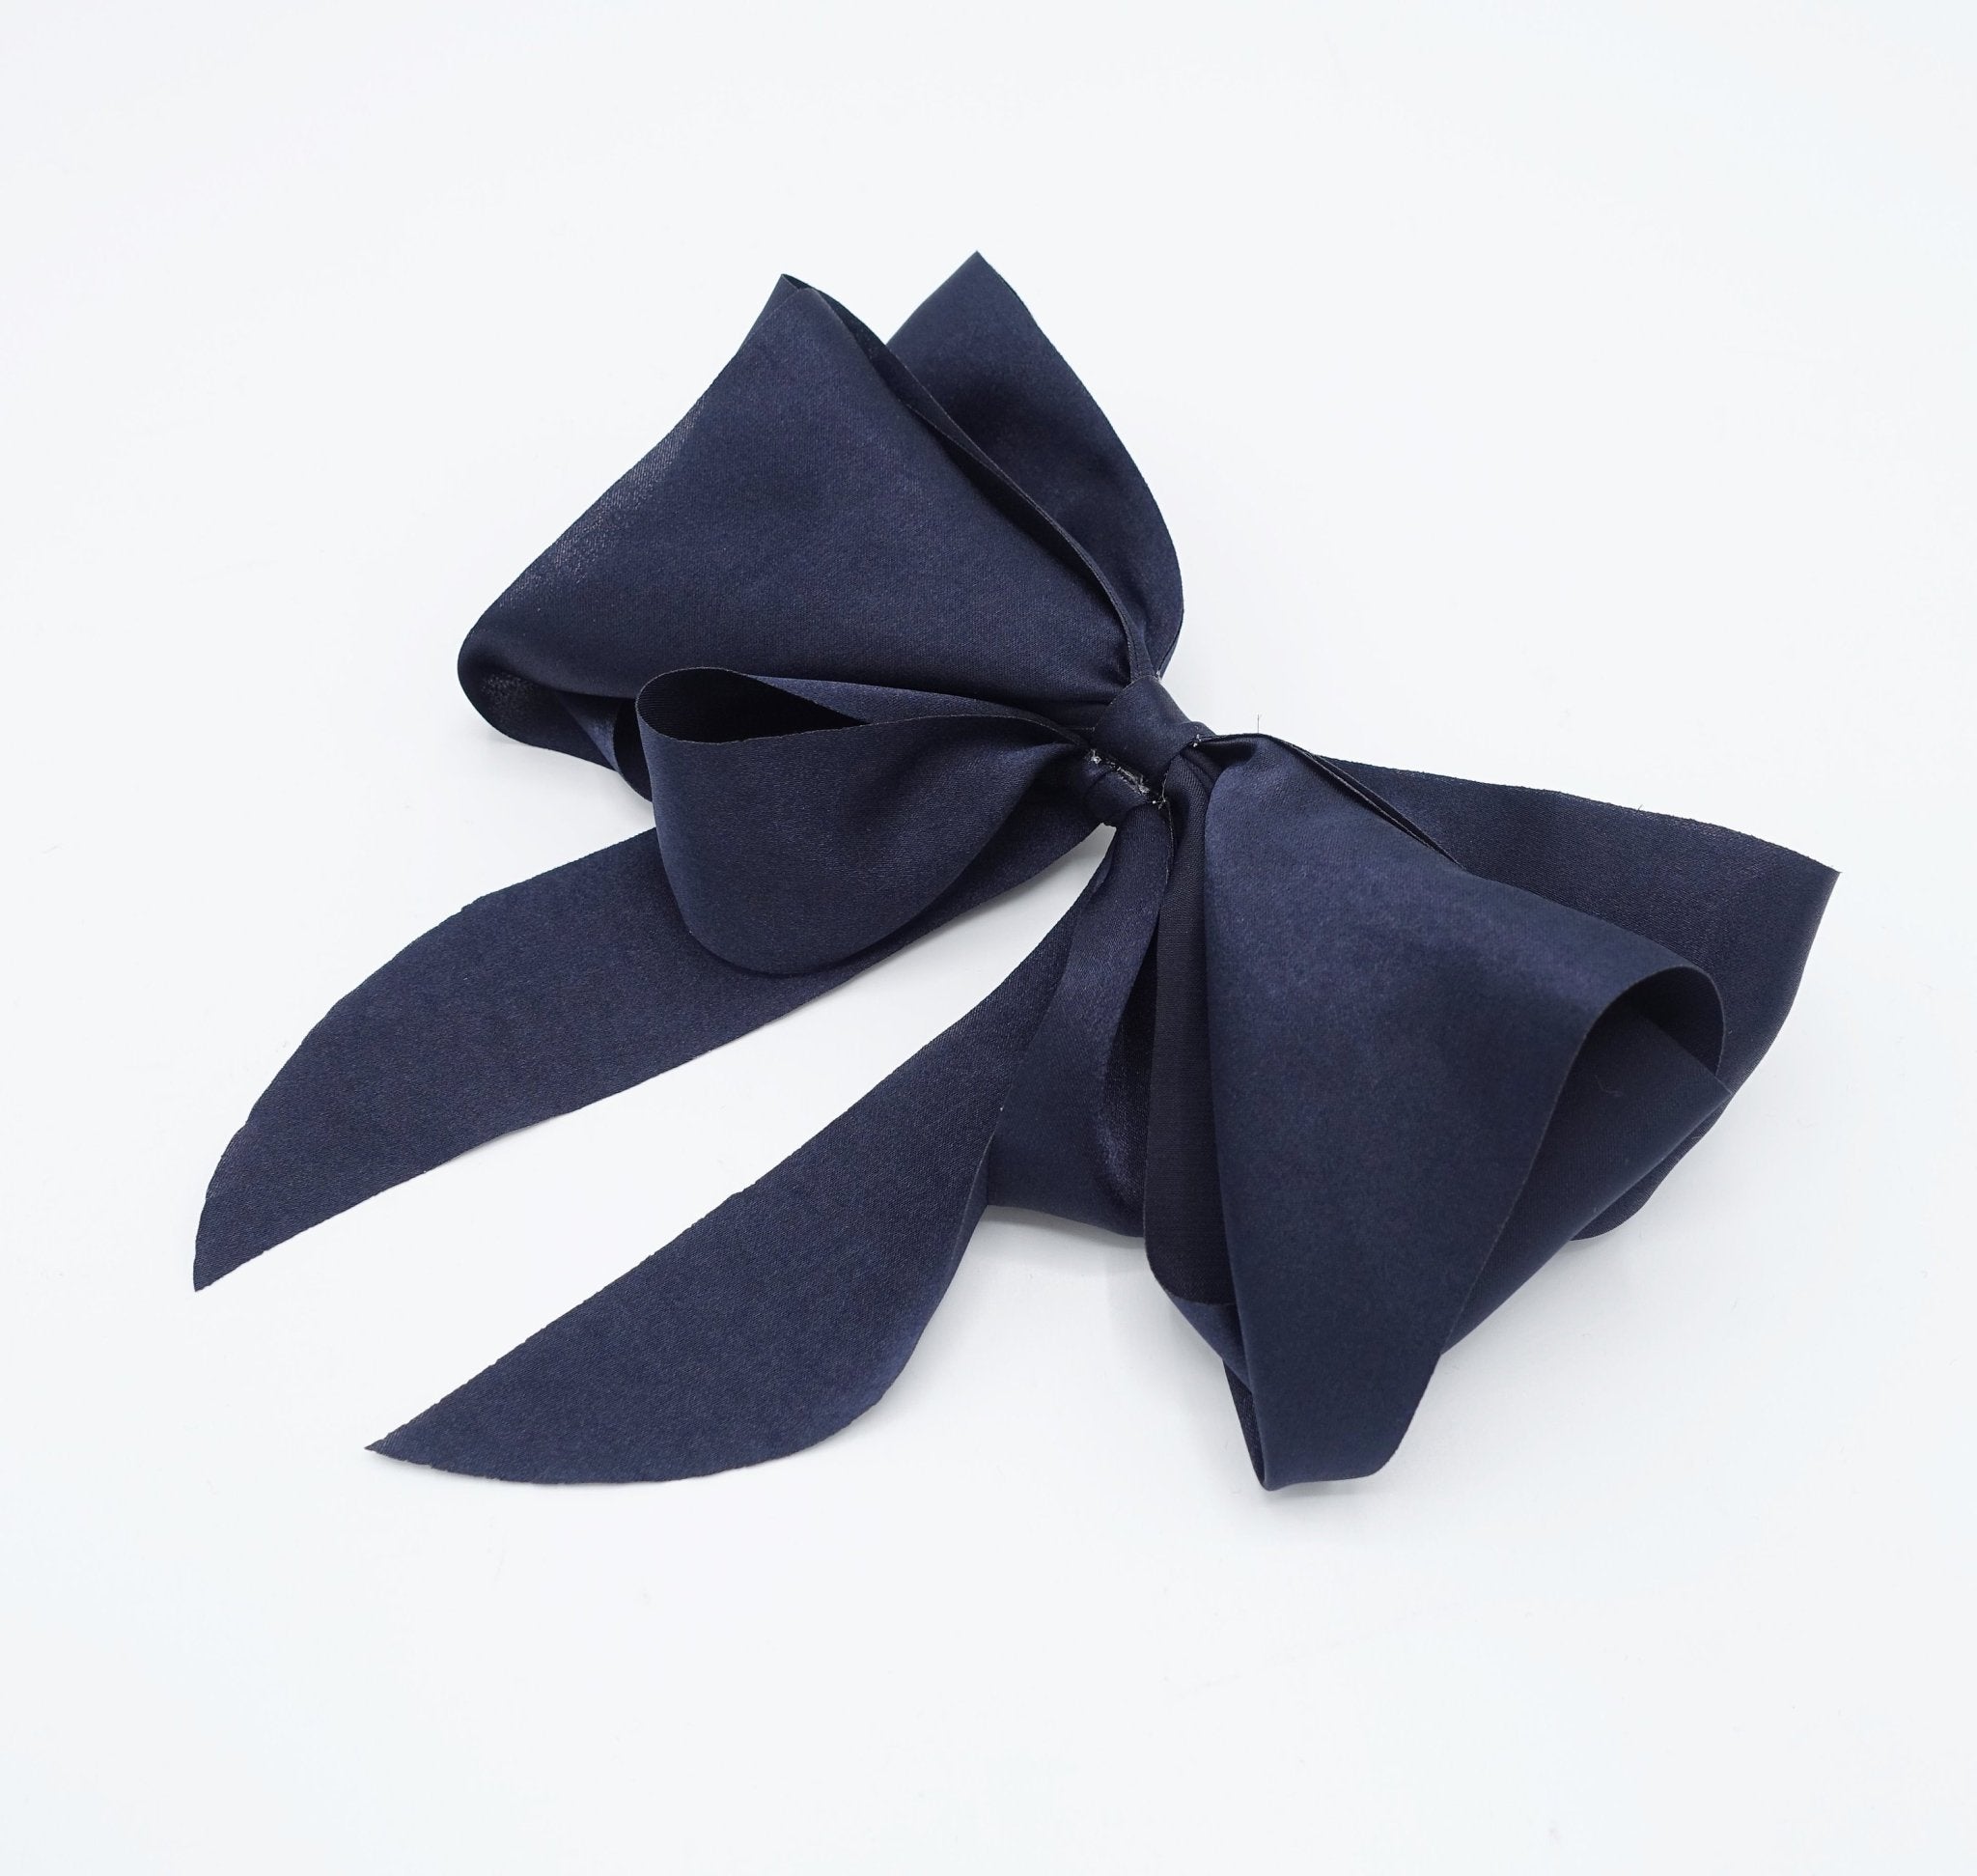 veryshine.com Barrettes & Clips Dark navy solid layered hair bow tailed stylish french barrette women hair accessory